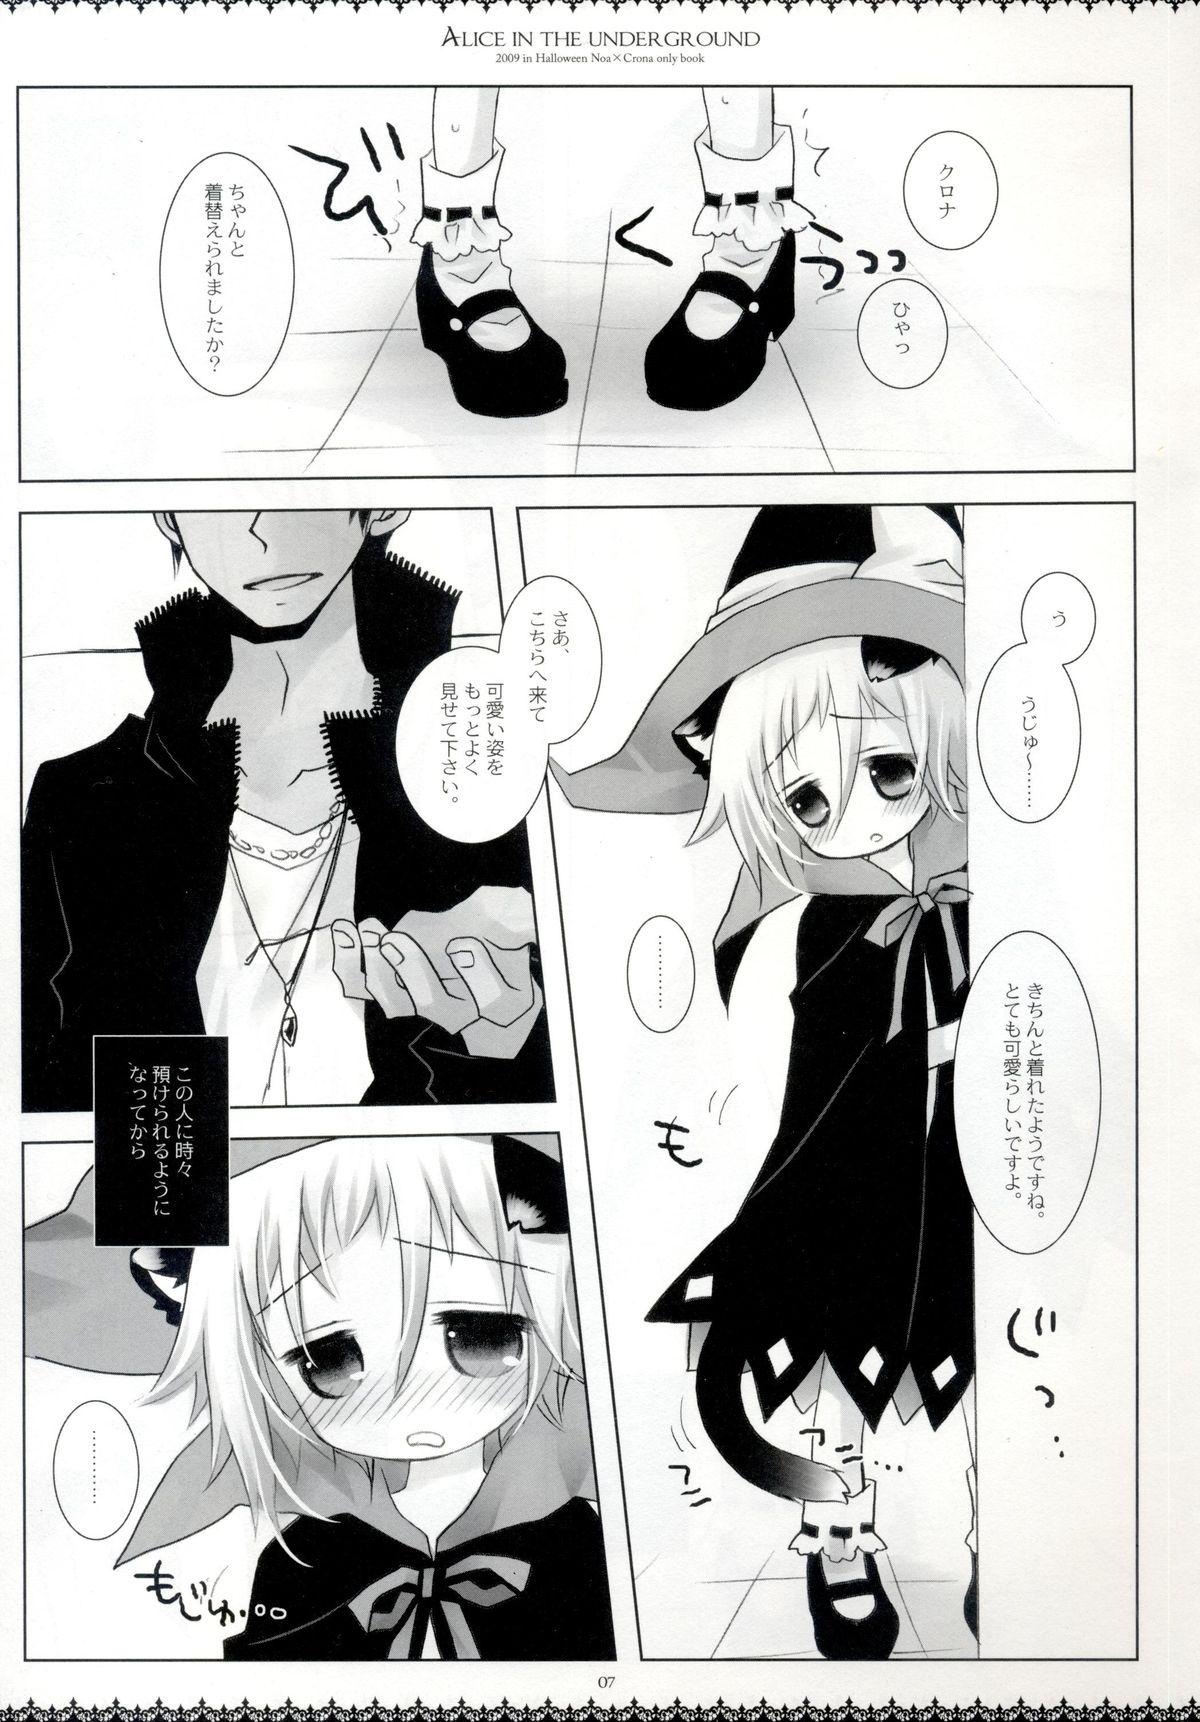 High Heels Alice in the underground - Soul eater Straight - Page 6